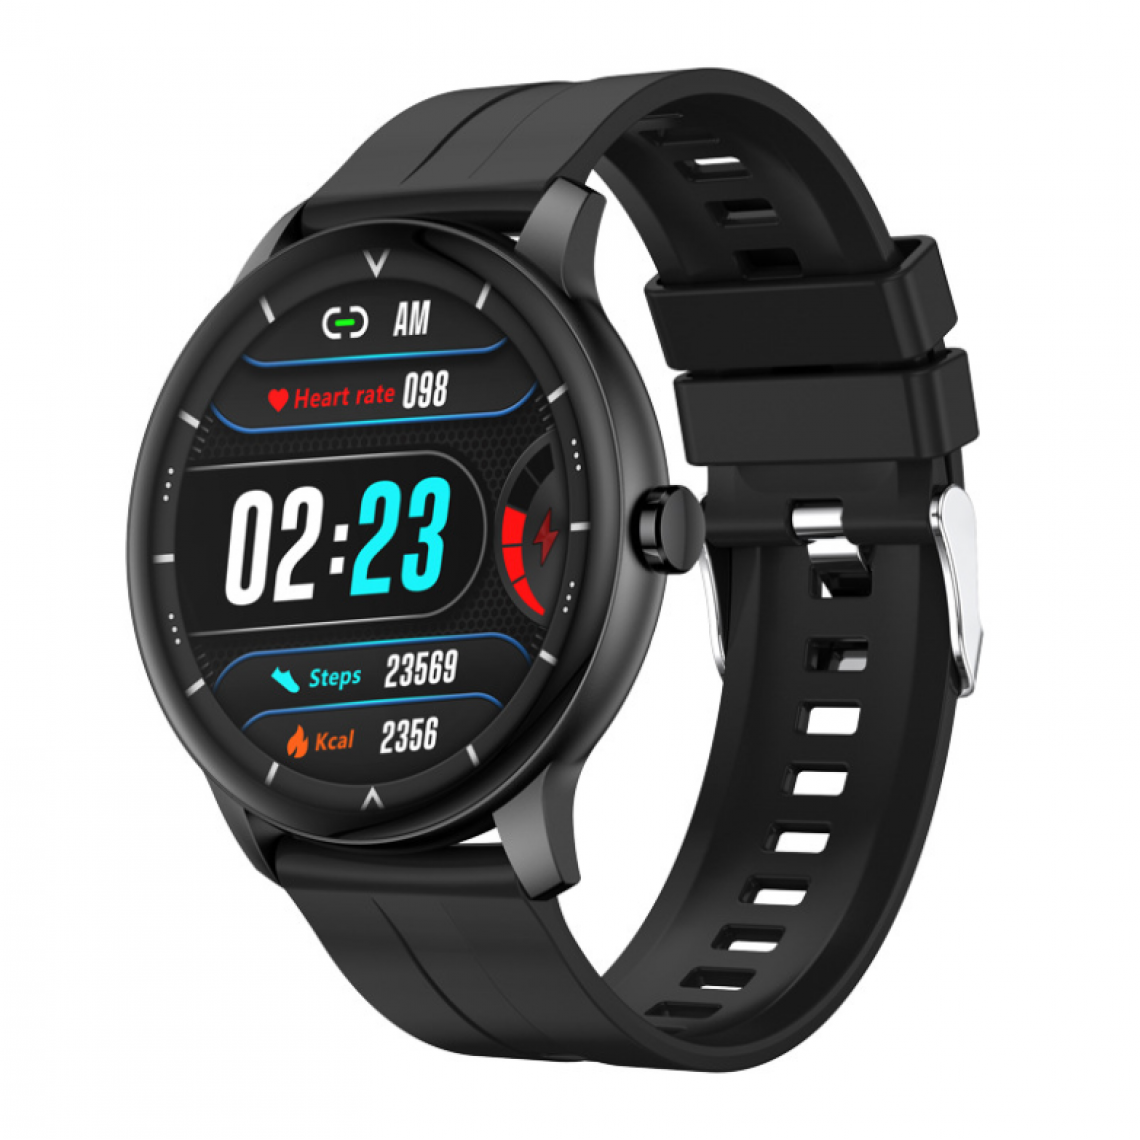 Chronotech Montres - Chronus Smart Watch, Bluetooth Calling, Sleep Monitoring, Sports Mode, for Android IOS (Black) - Montre connectée